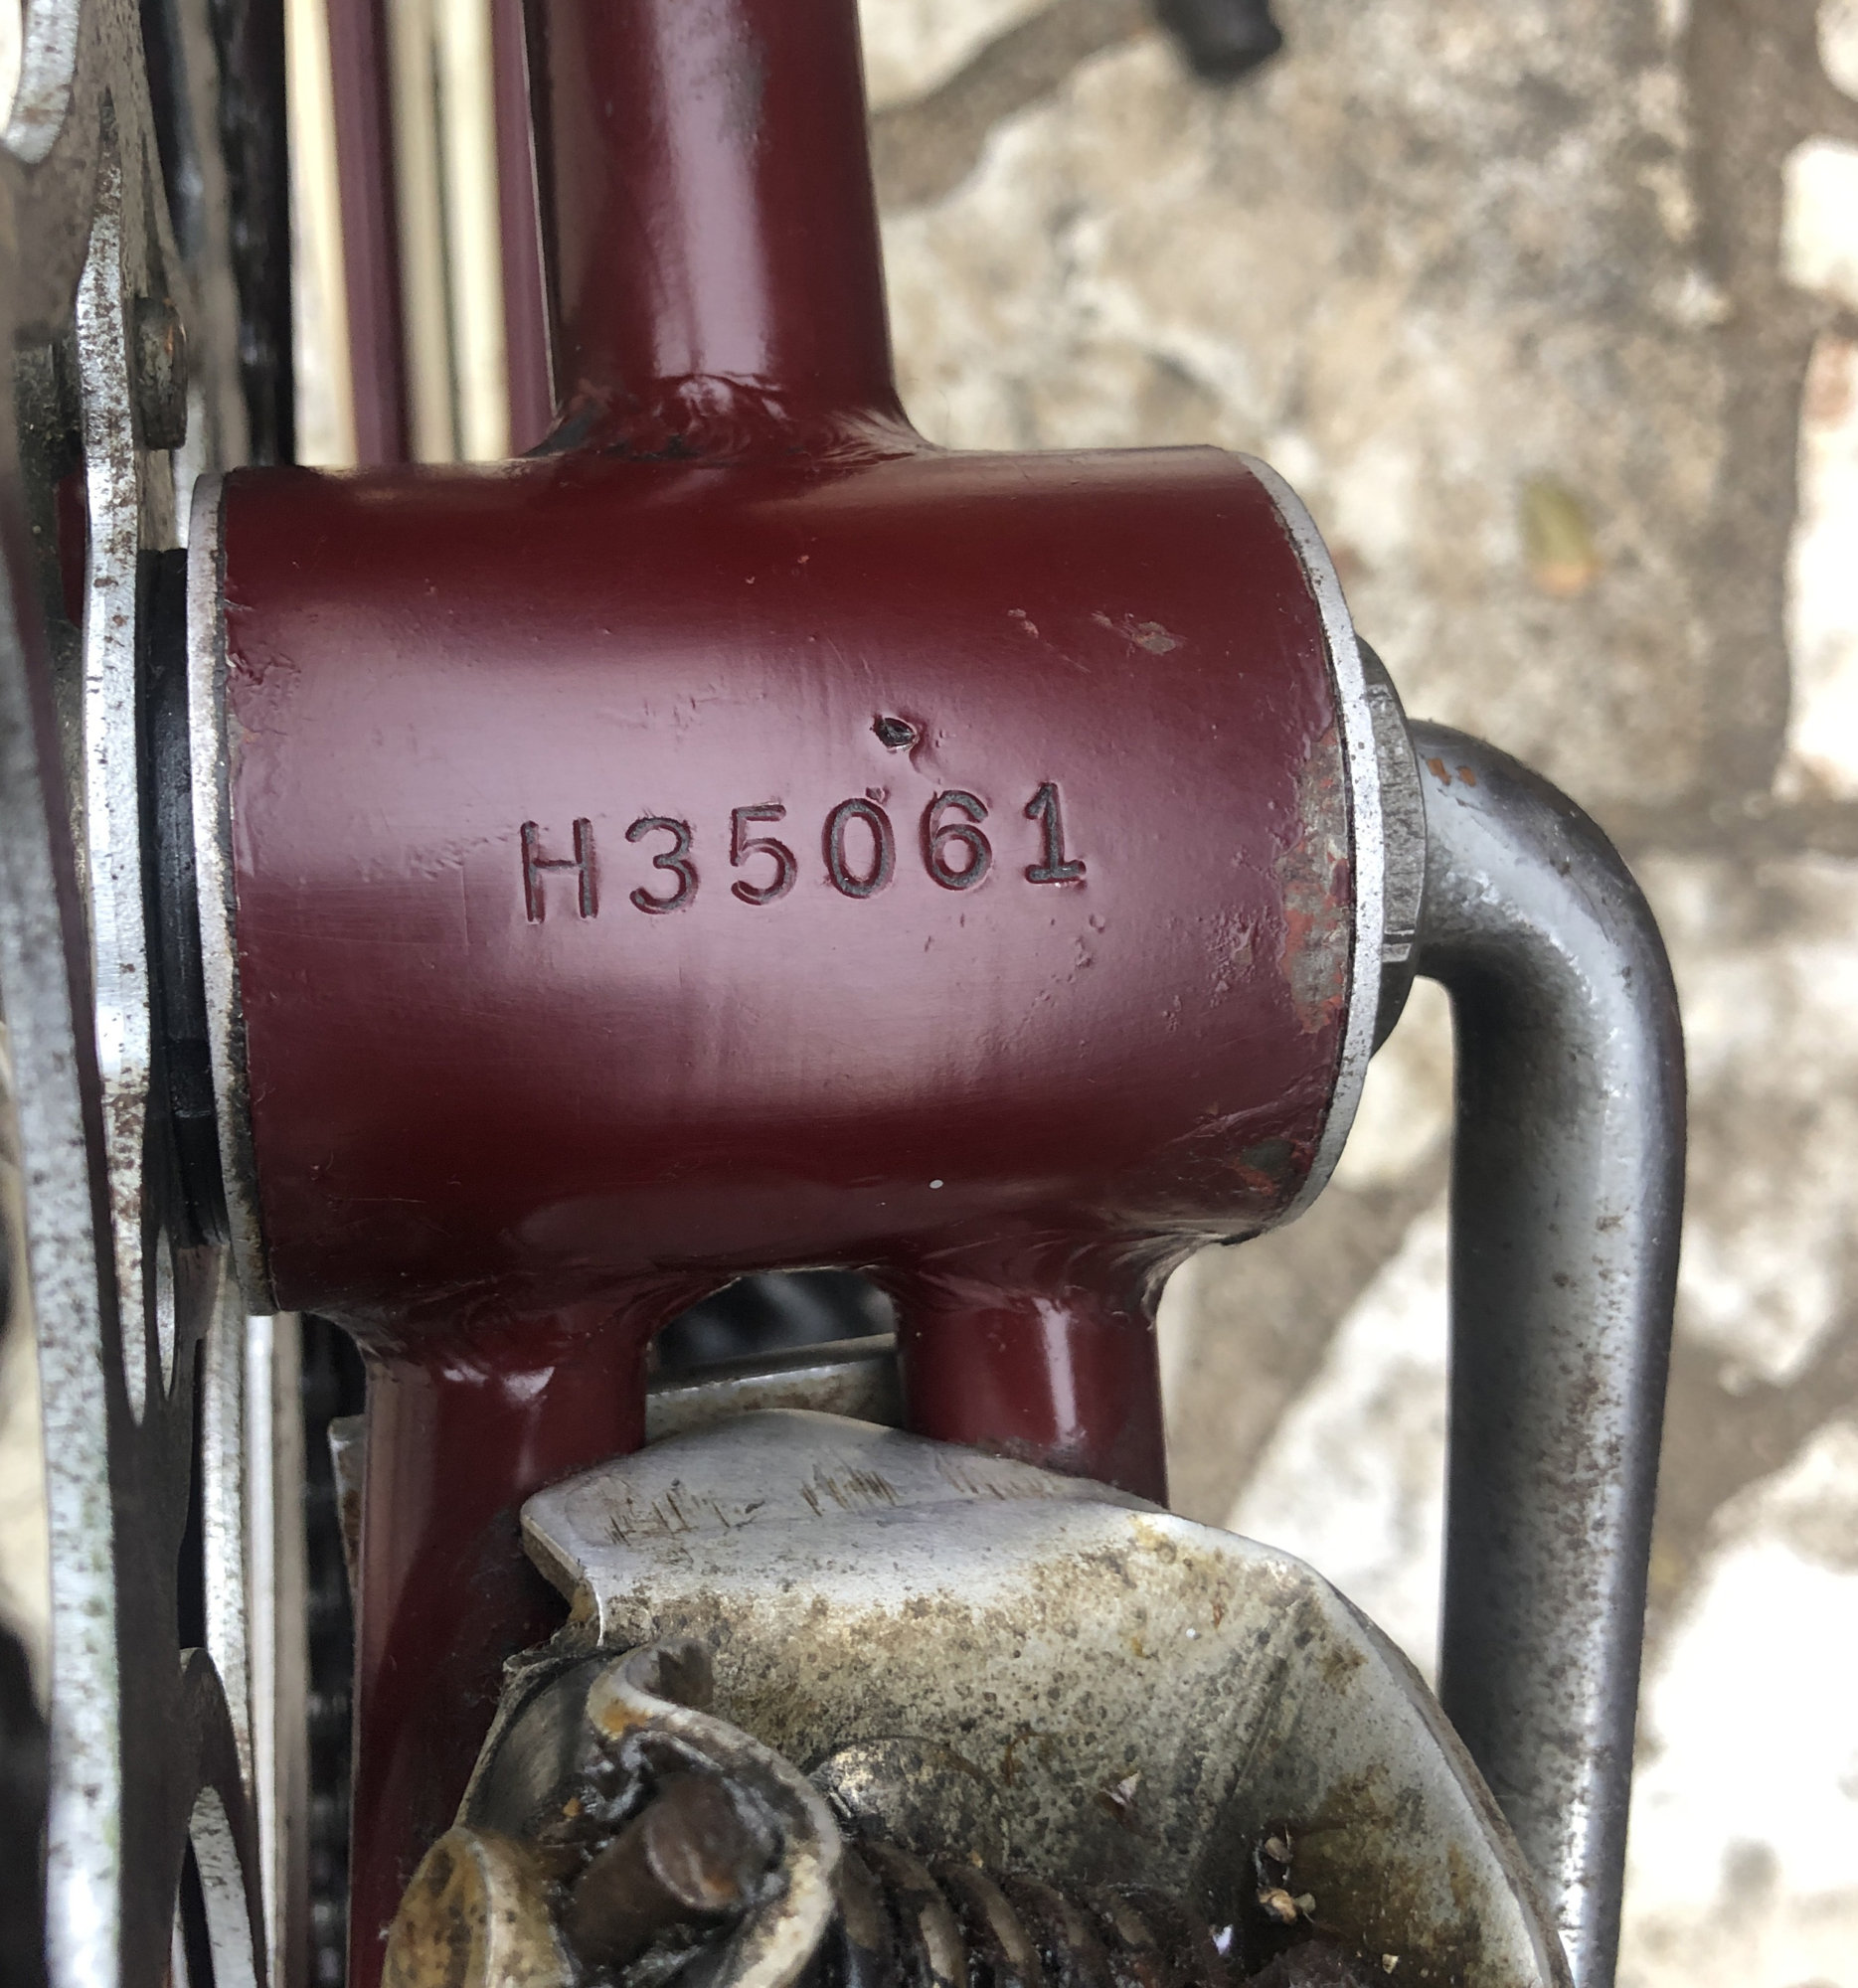 schwinn stingray serial numbers starting with kc